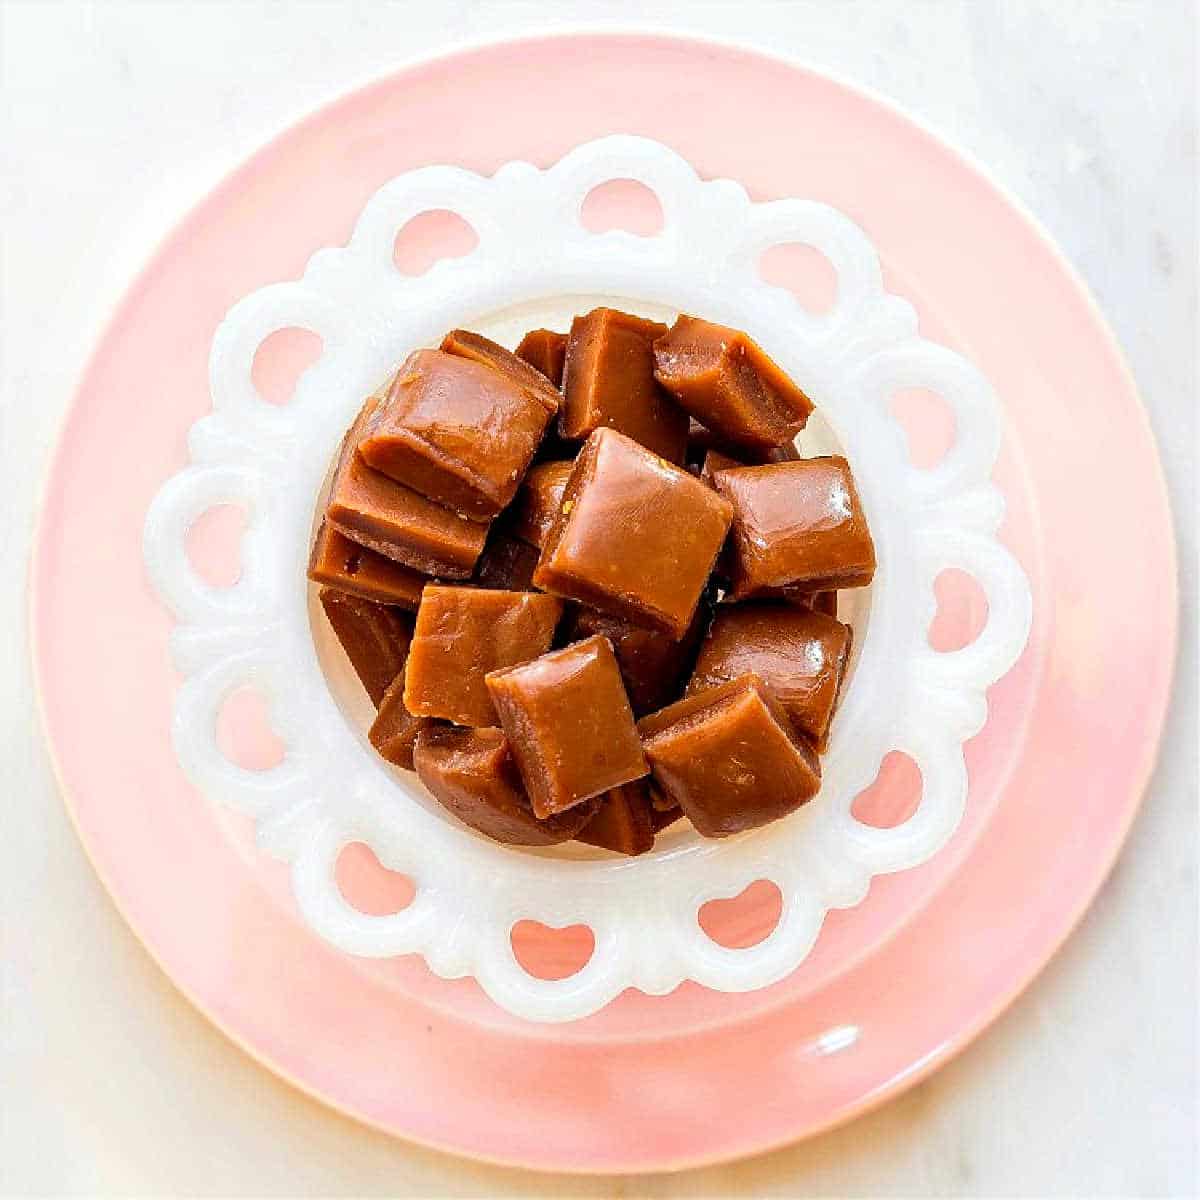 An overhead shot of a white candy dish on a pink plate filled with squares of dark caramel candy.